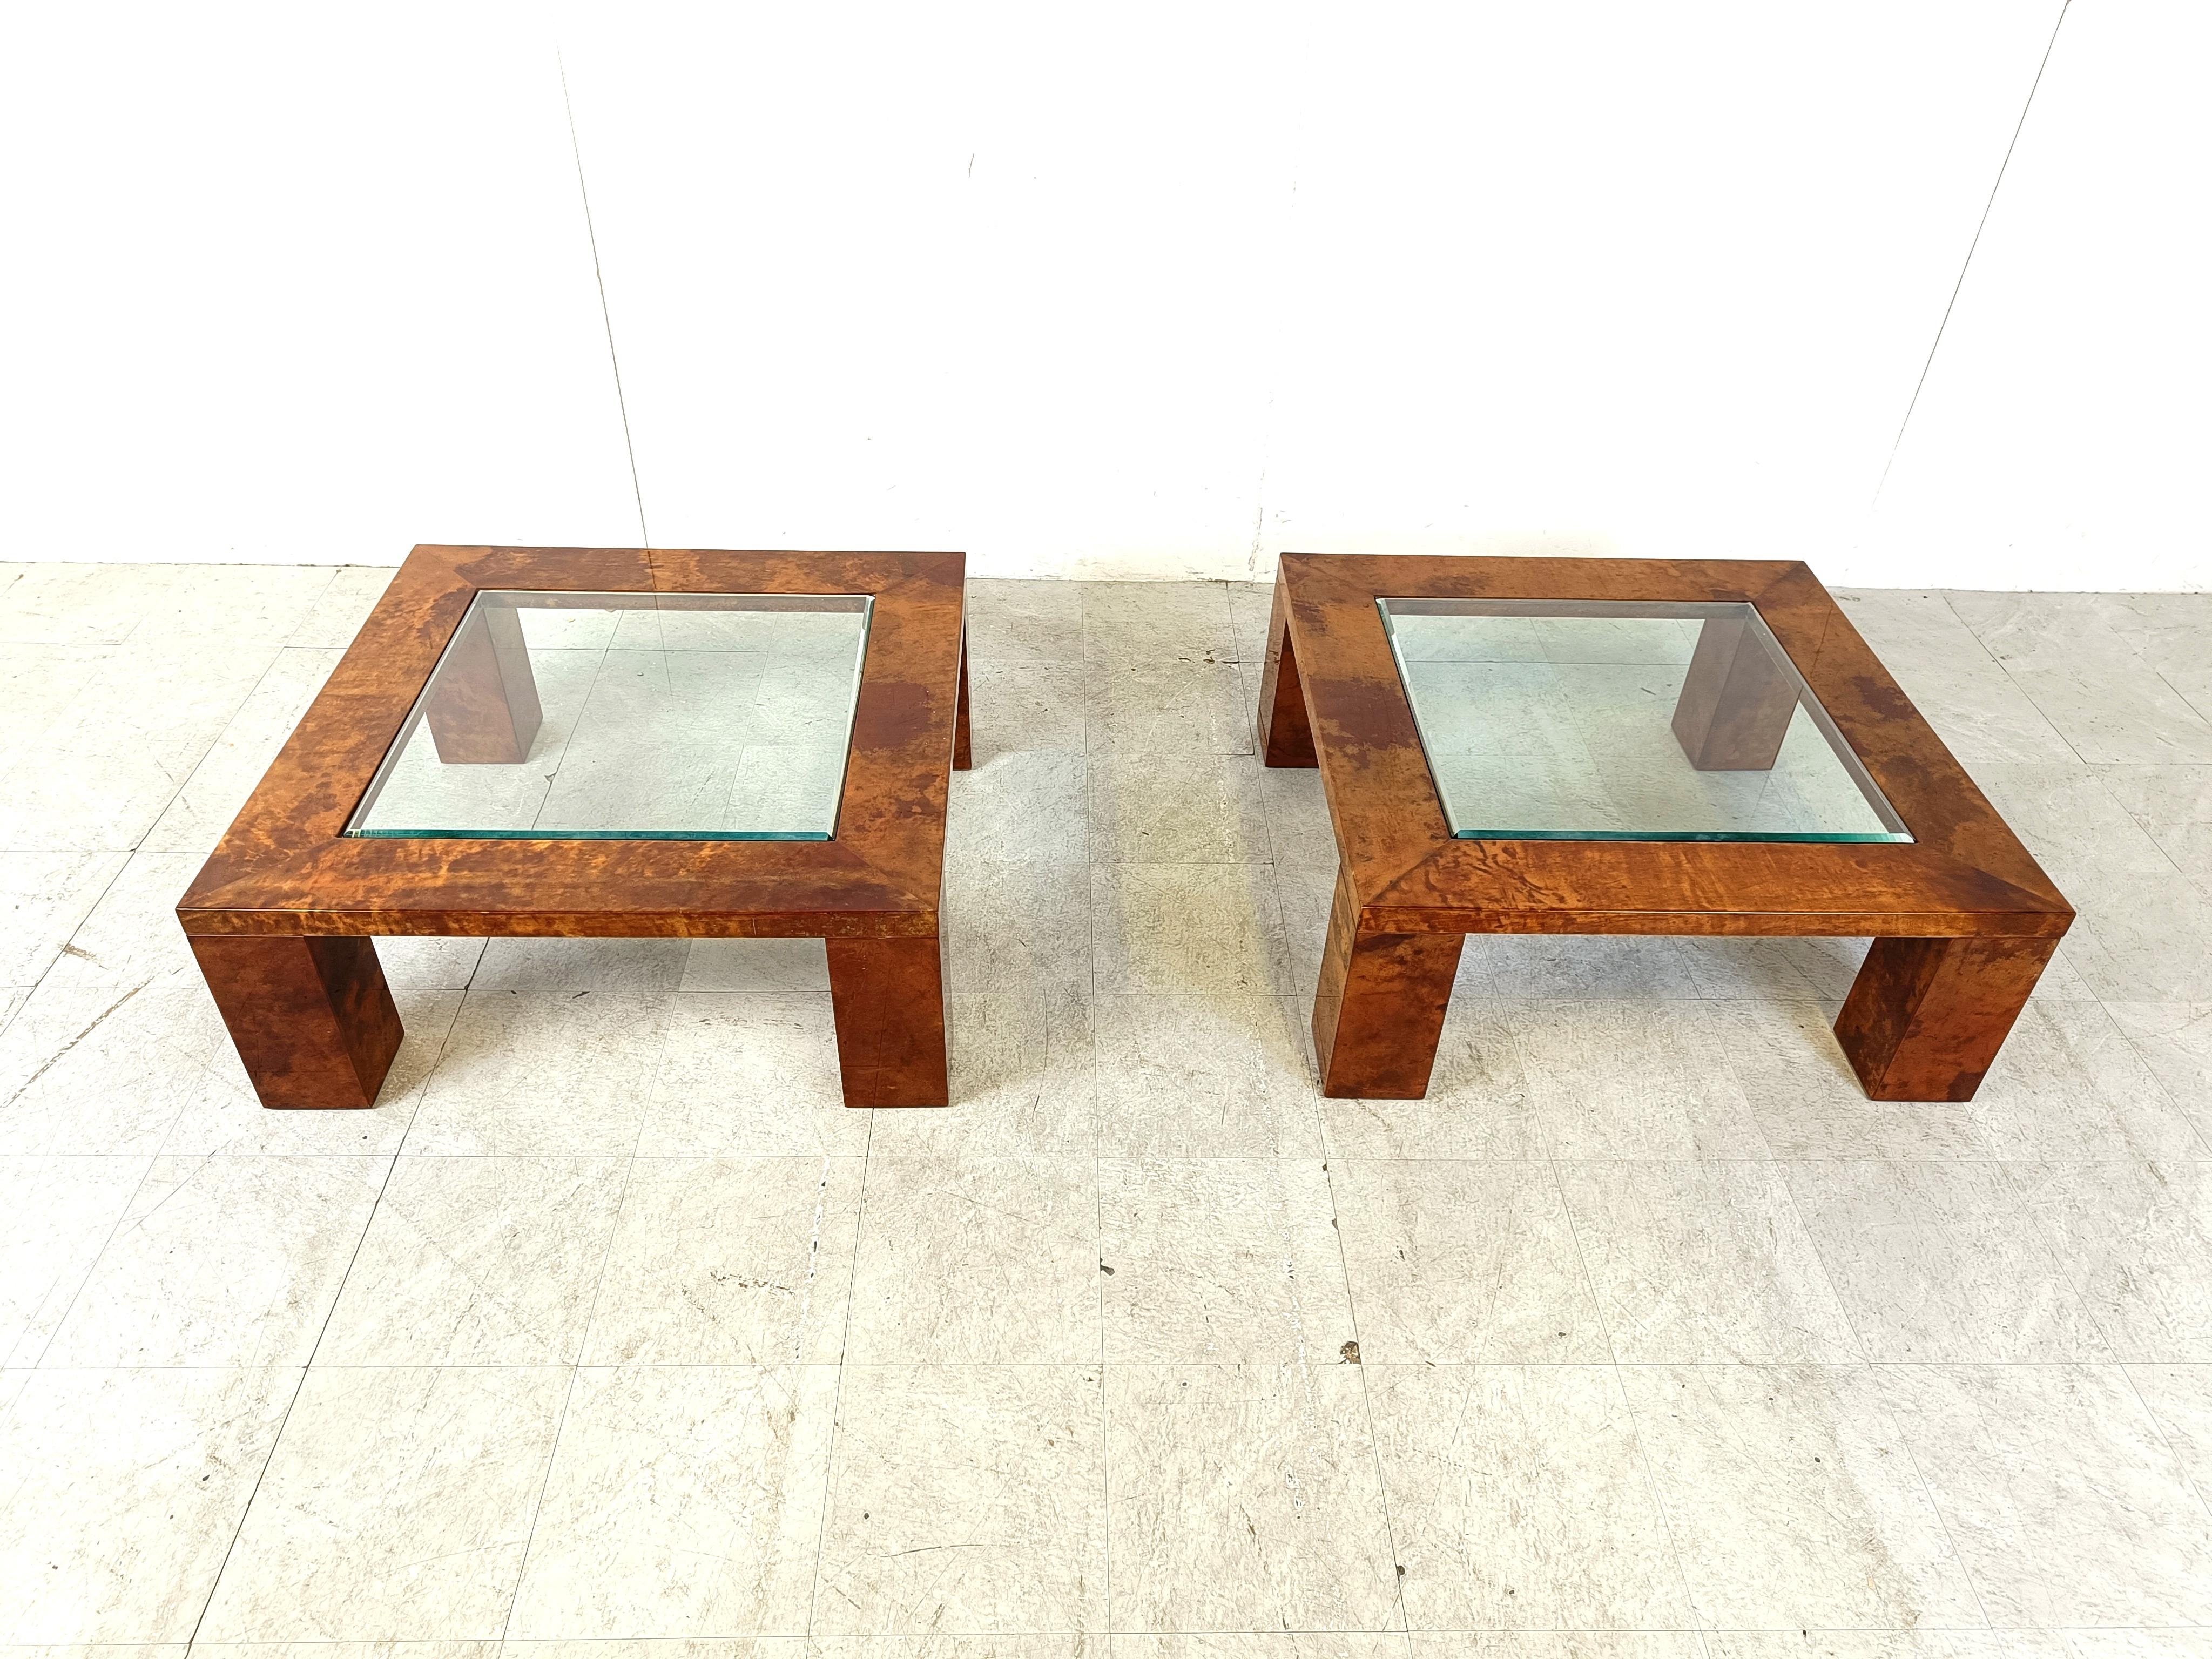 Mid century pair of lacquered goatskin coffee tables by Aldo tura.

The coffee tables each have a square beveled clear glass inlaid top.

Beautiful colour and very rare as a pair.

1960s - Italy

Dimensions:
Height: 37cm
Width depth: 90cm

Ref.: